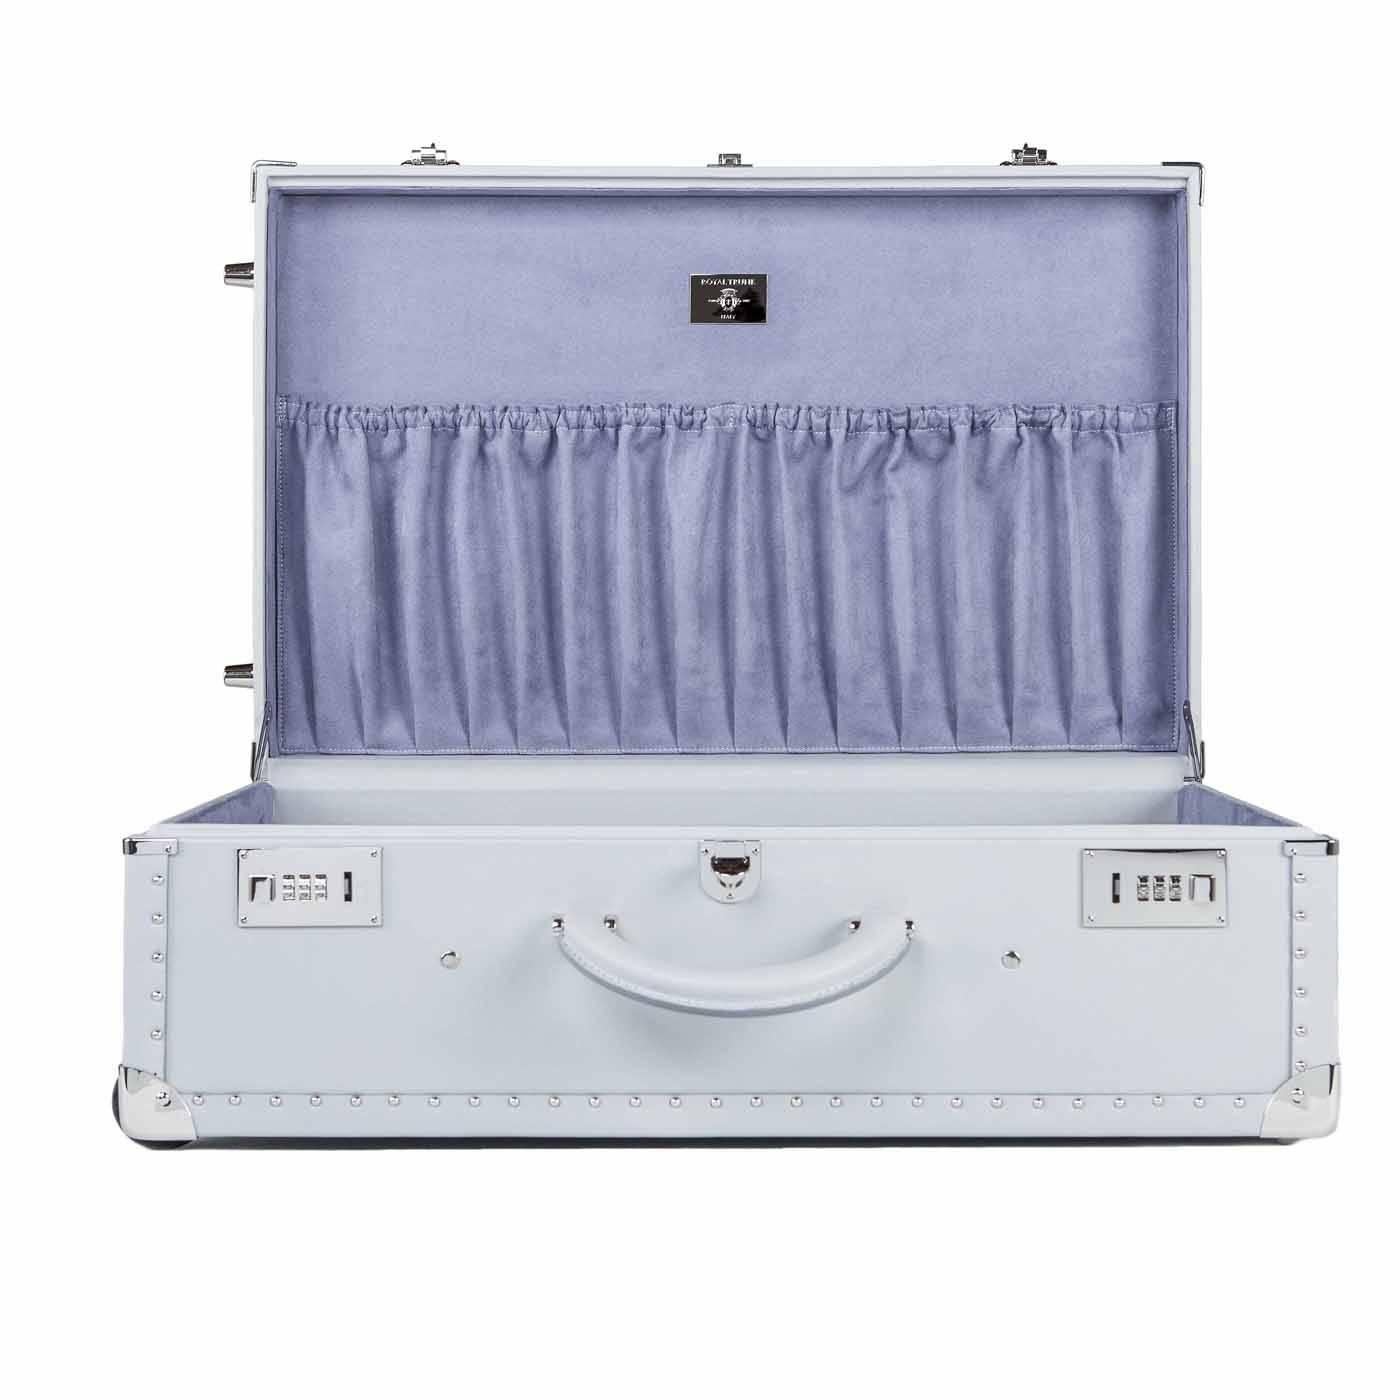 This elegant trolley has a vintage look and the comfort of modern luggage. Made with artisanal methods, it is light, sturdy, and easy to carry thanks to its wheels. It features both hand-sewn handles and a telescopic handle. The interior is lined